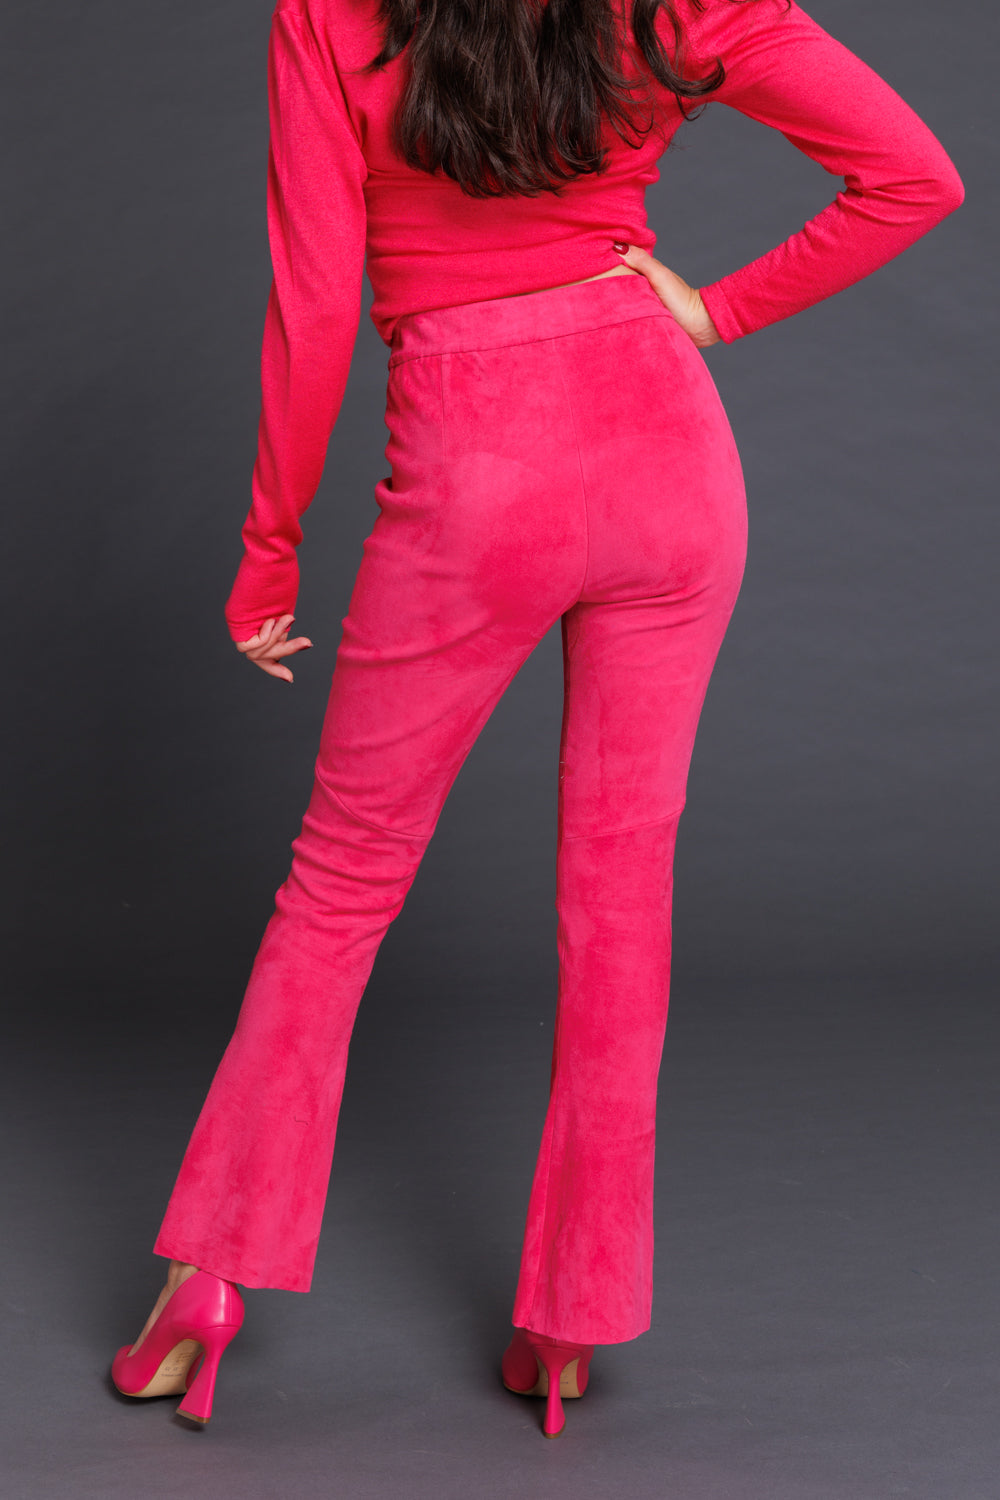 Leather trousers with flares made of stretch lambskin - Sorbet